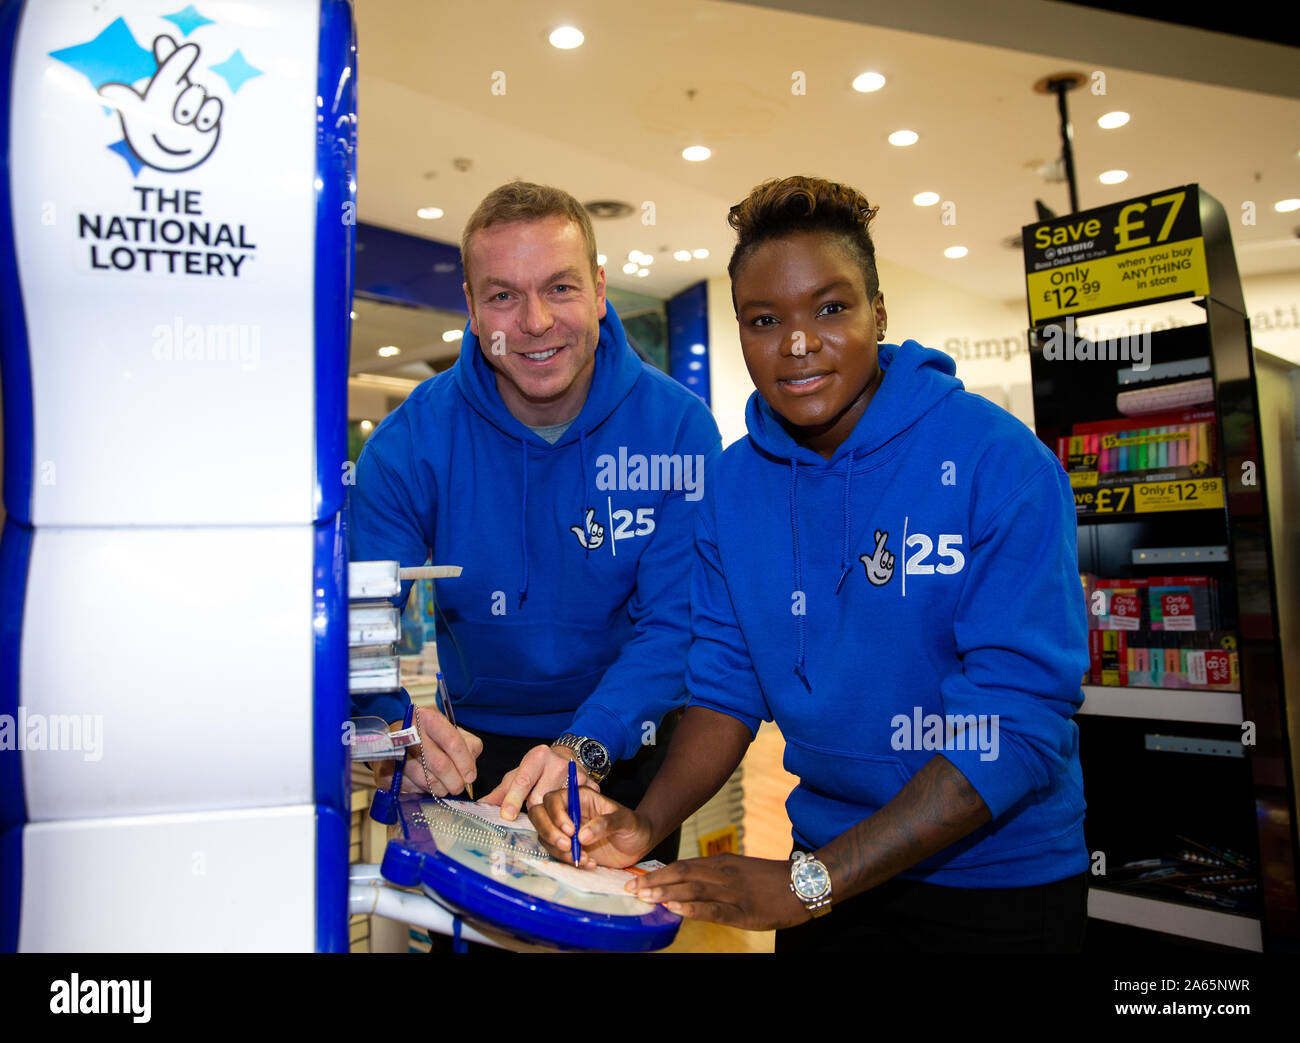 Sir Chris Hoy (left) and Nicola Adams filling in their National Lottery's numbers during a photocall at Westfield Stratford City, London. Stock Photo